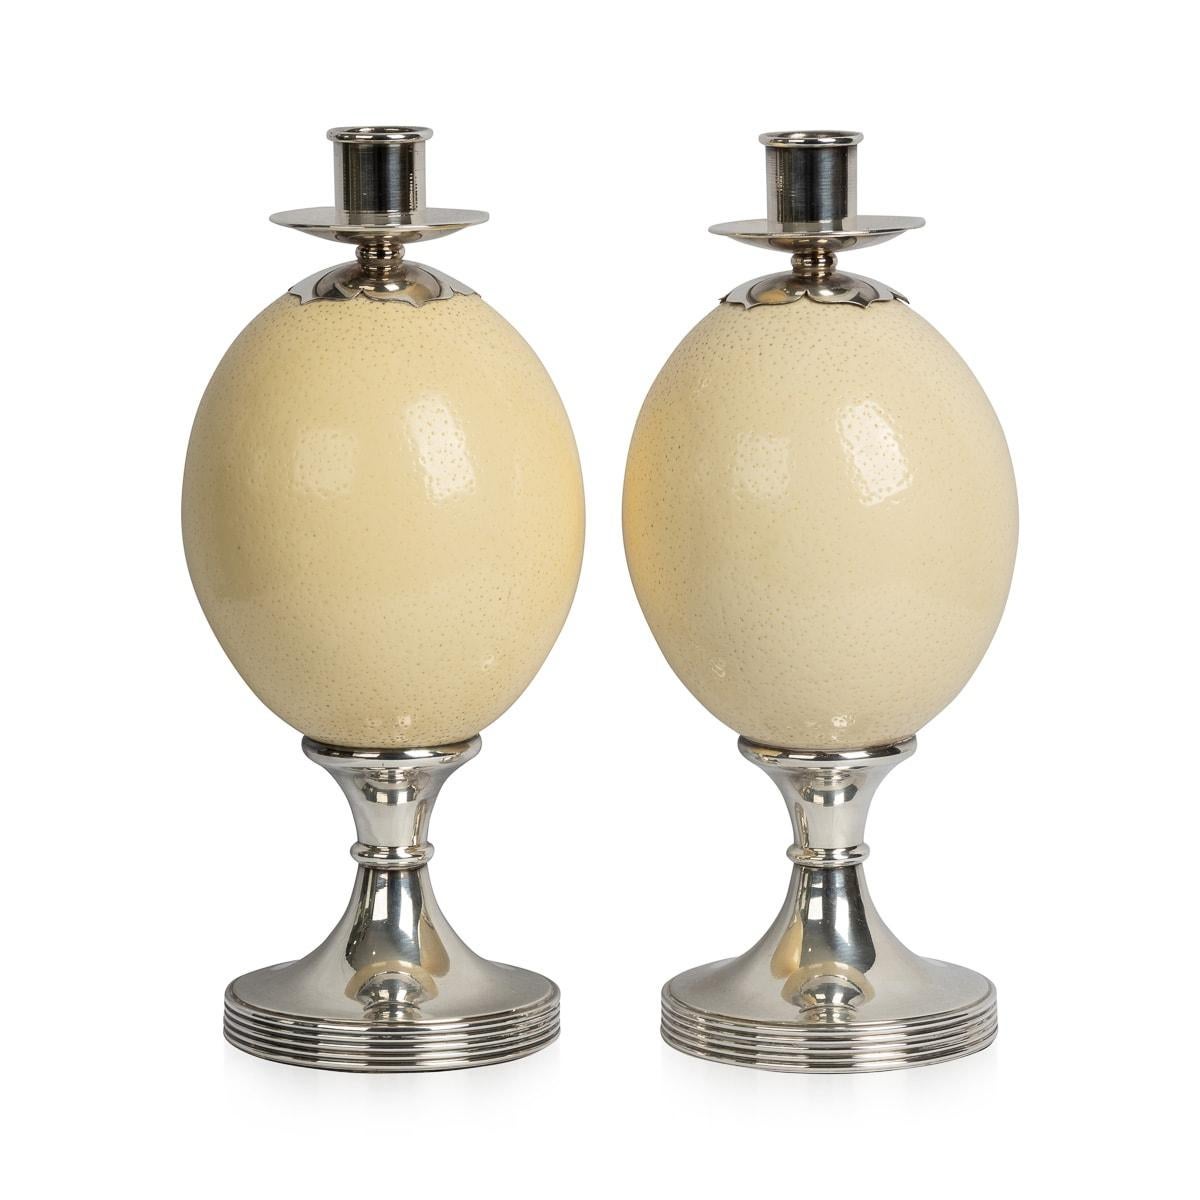 A pair of ostrich egg candlesticks with silver plated mounts by Anthony Redmile. Impressed and signed Redmile London, retailed in his shop and purchased in the 1970s.

Anthony Redmile burst into the London interior design scene in the 1960s,